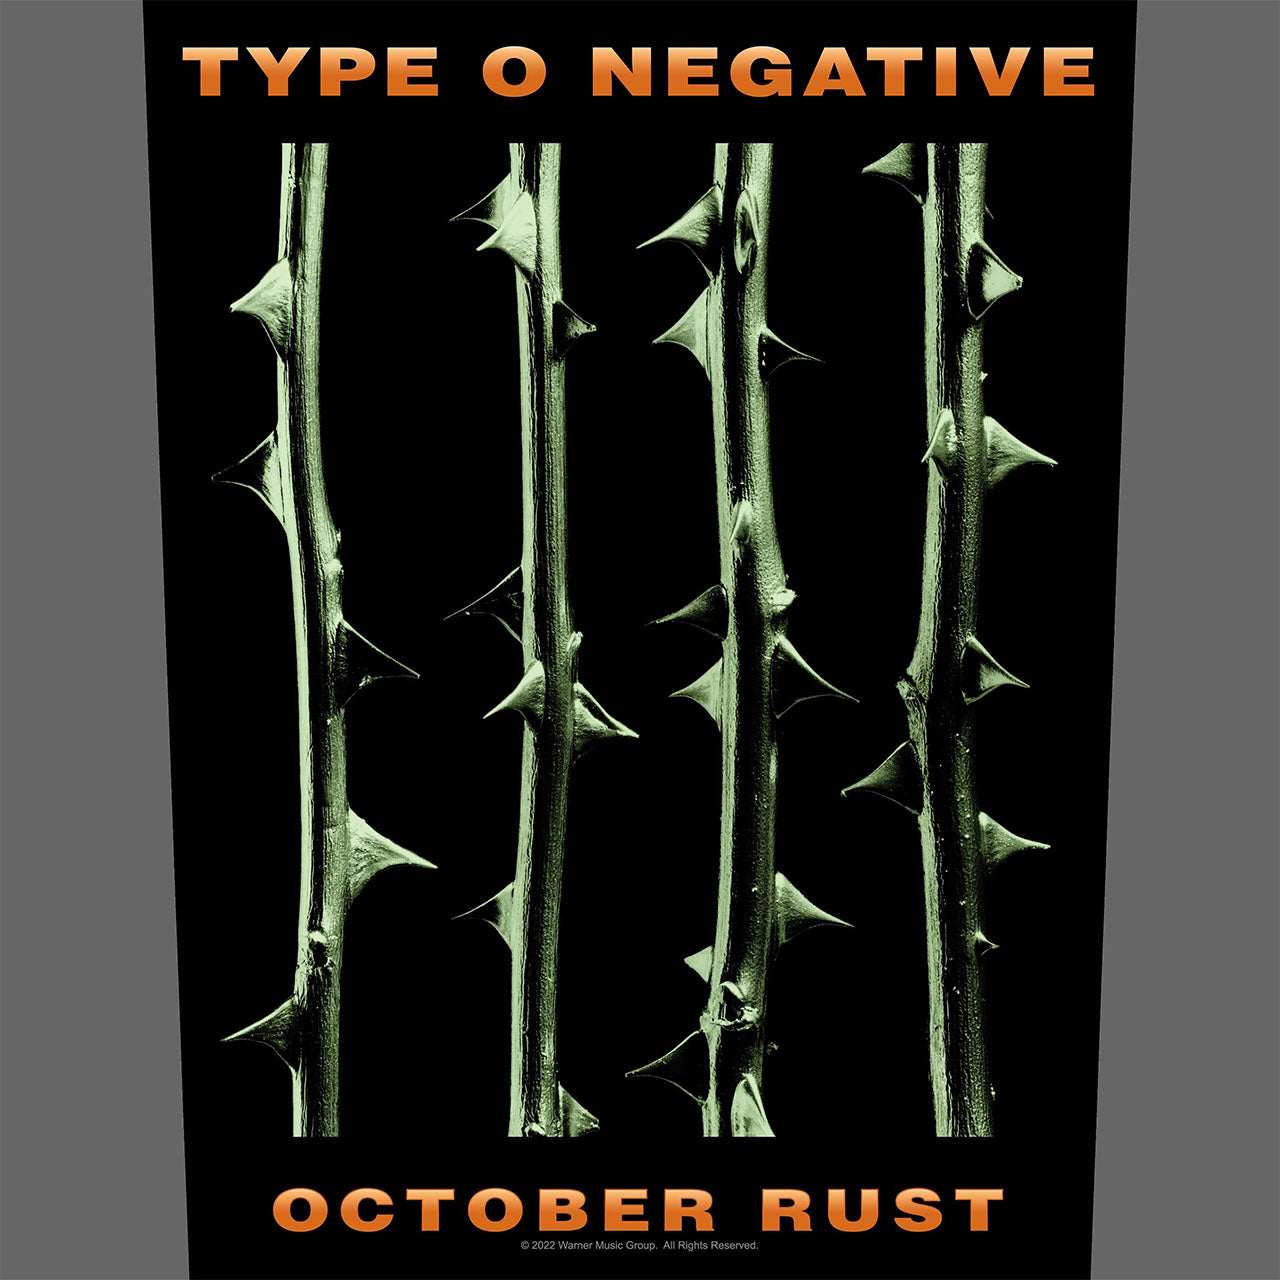 Type O Negative - October Rust (Backpatch)